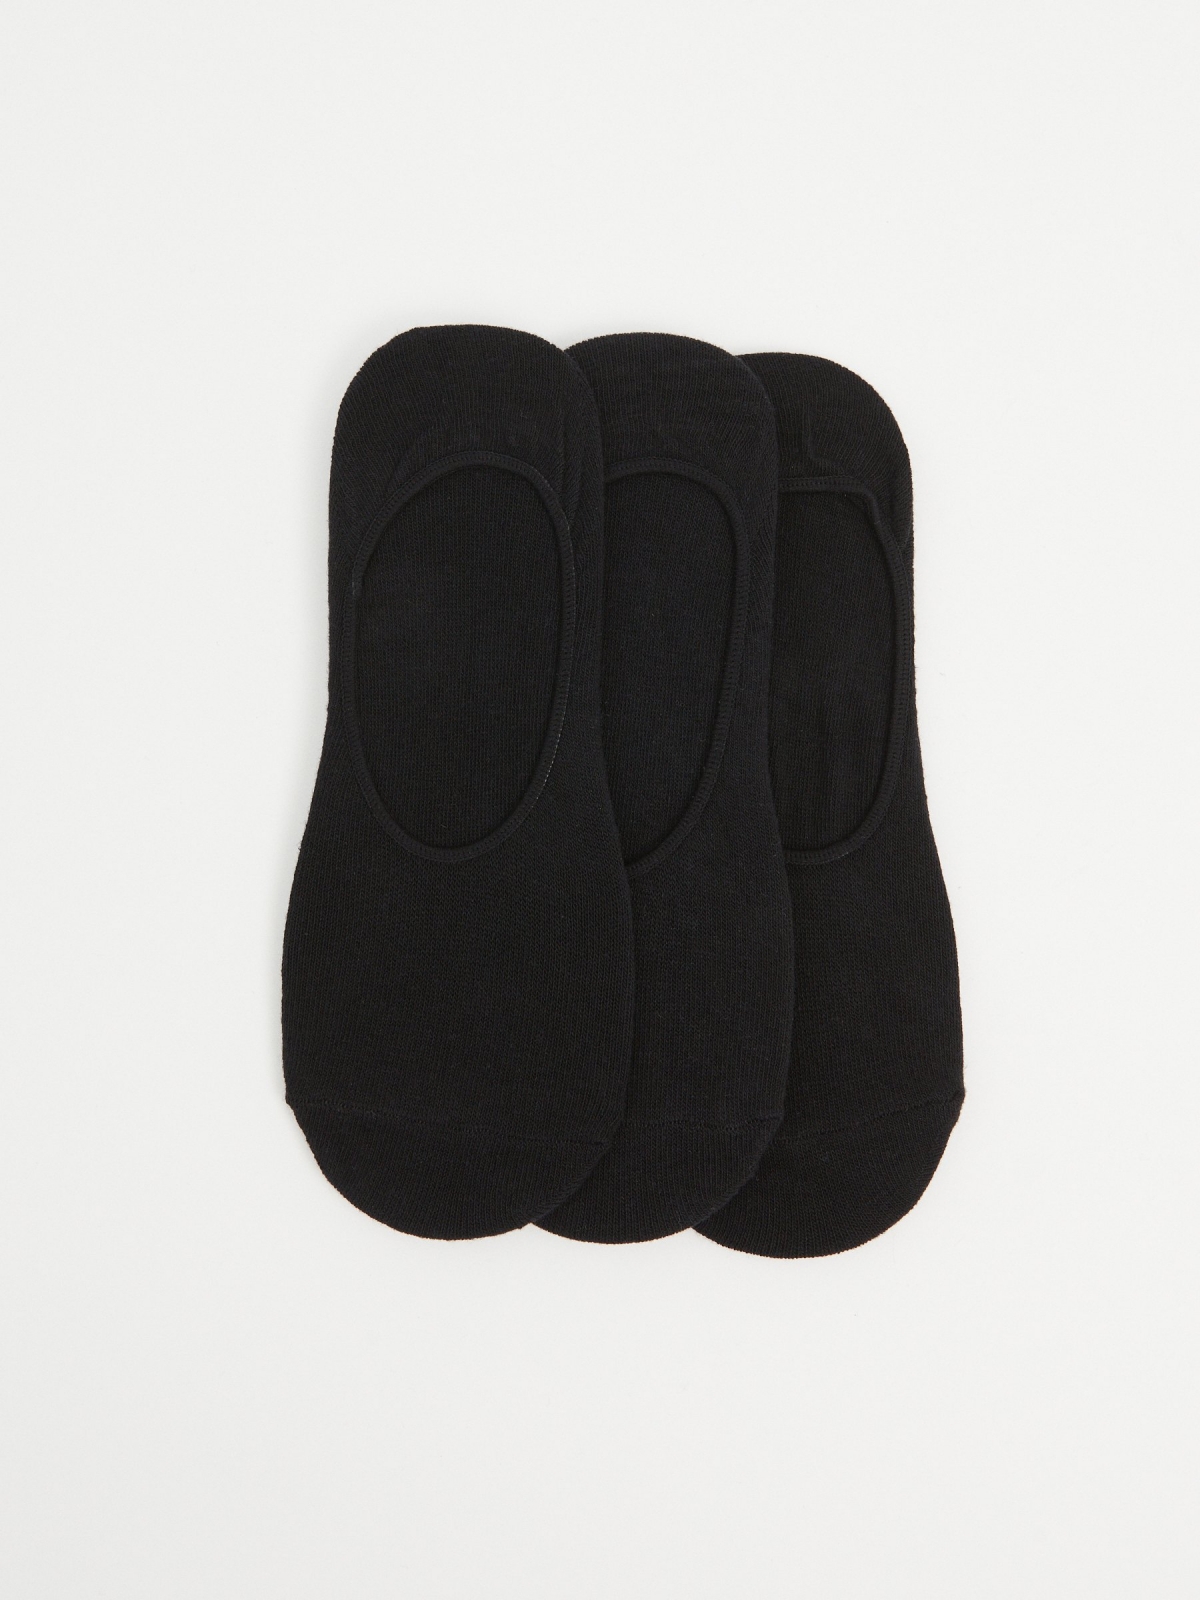 Pack of 3 black invisible socks black front view